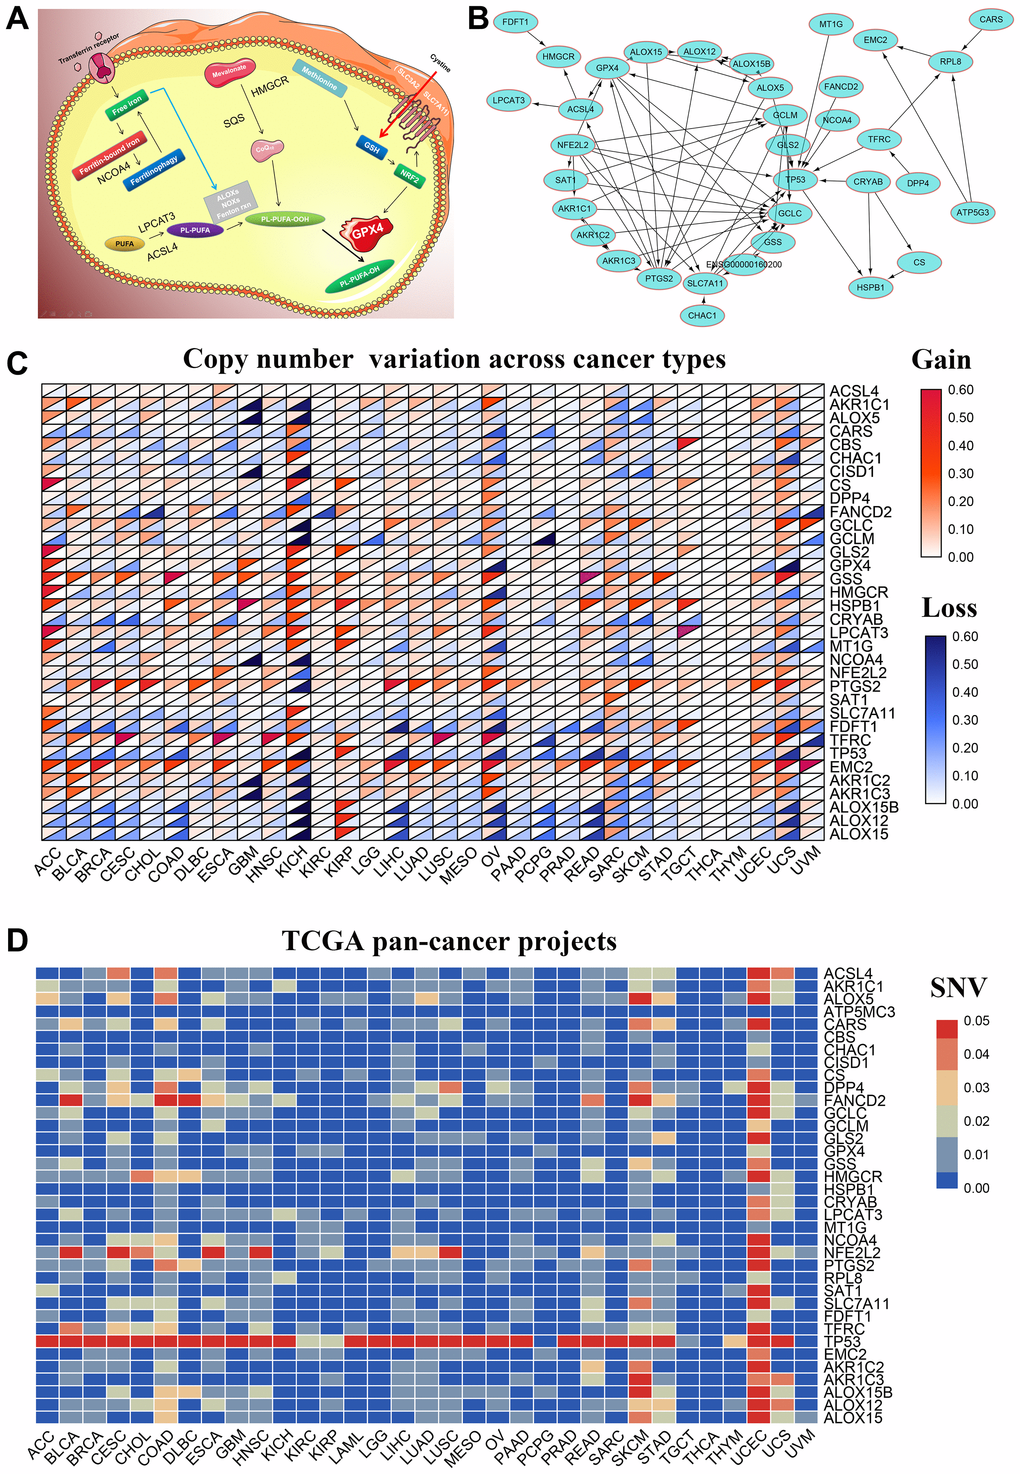 Genetic alterations and PPI network of 36 FRGs in the TCGA pan-cancer datasets. (A) Diagrammatic representation shows intracellular localization of ferroptosis-related proteins in different signaling pathways. (B) The protein-protein interaction network analysis results of 36 ferroptosis-related genes (FRGs) are shown. (C) The copy number variation (CNV) frequency of the 36 FRGs is shown for the 32 cancer types. The color code bar on the right refers to differential gain or loss of copy numbers. (D) The single nucleotide variation (SNV) frequency of the 36 FRGs is shown for the 32 cancer types. The color code bar on the right refers to differential SNV frequencies.